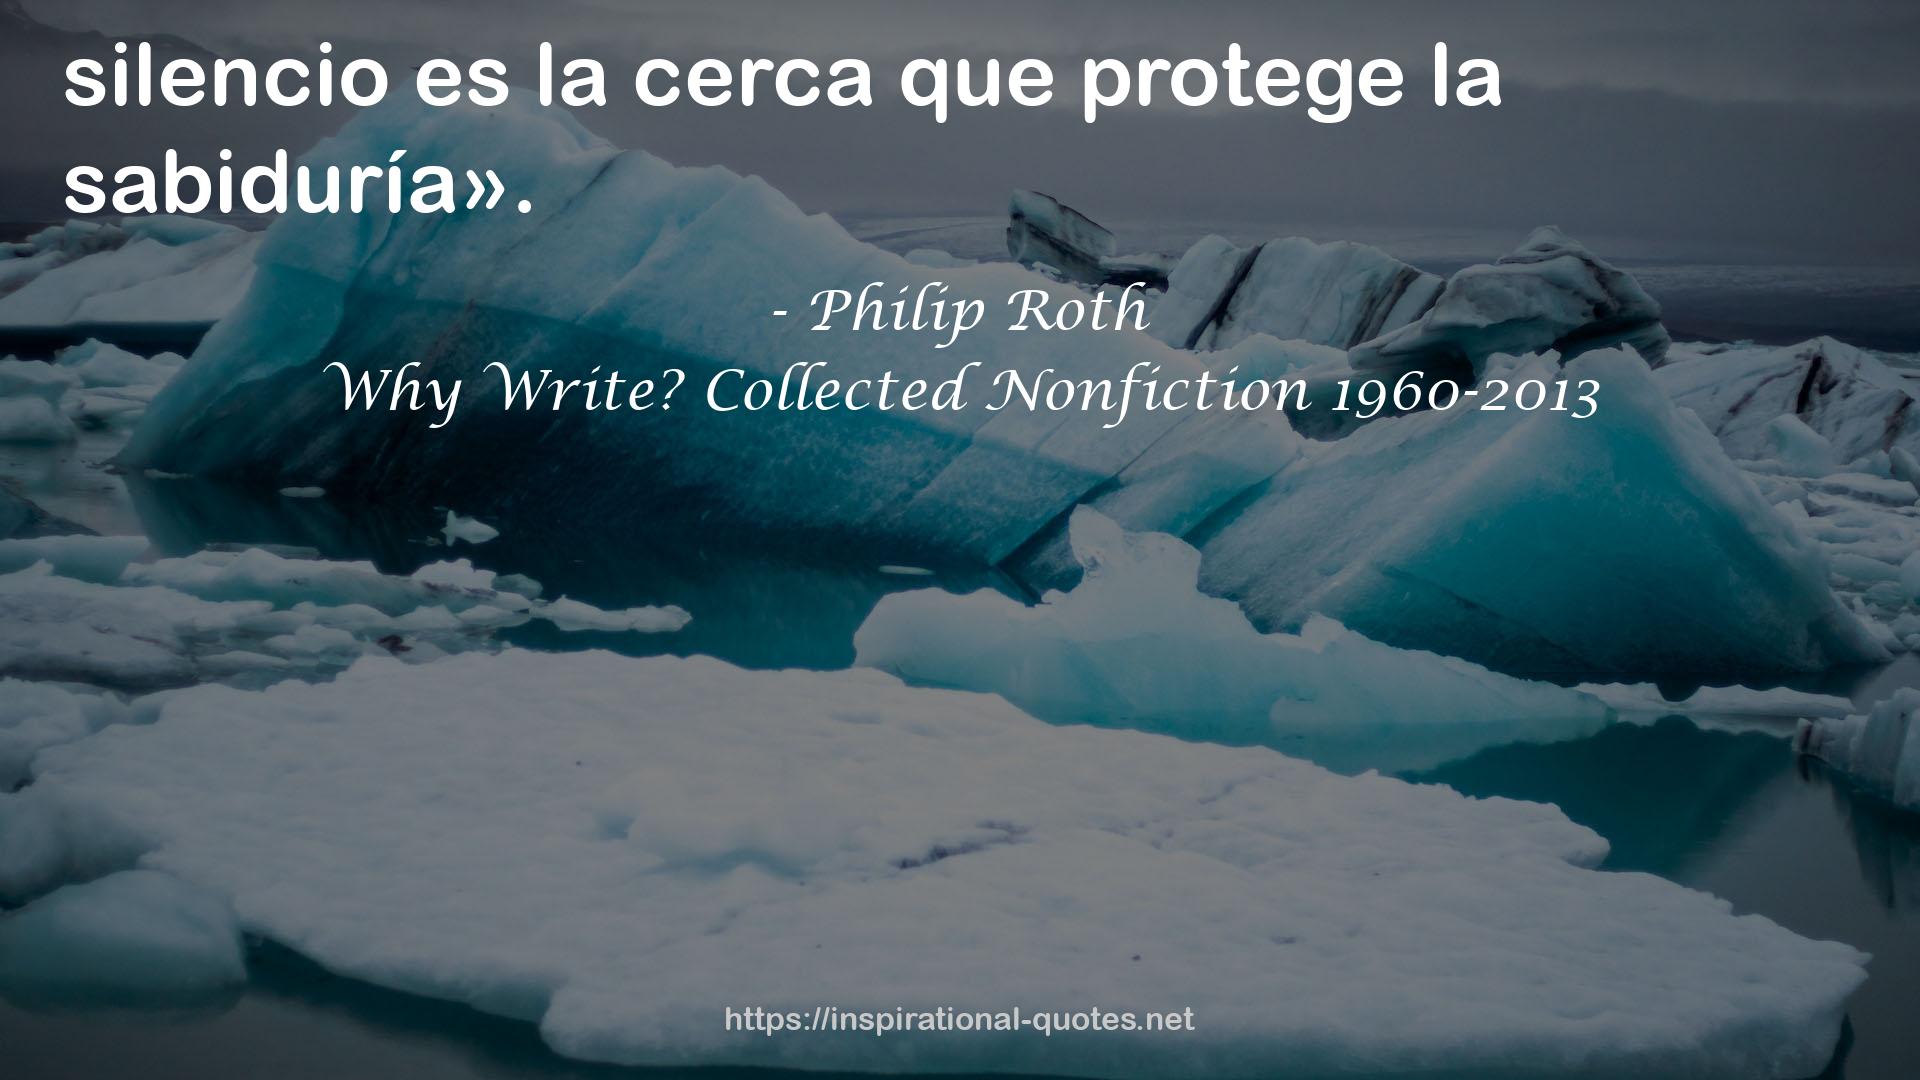 Why Write? Collected Nonfiction 1960-2013 QUOTES